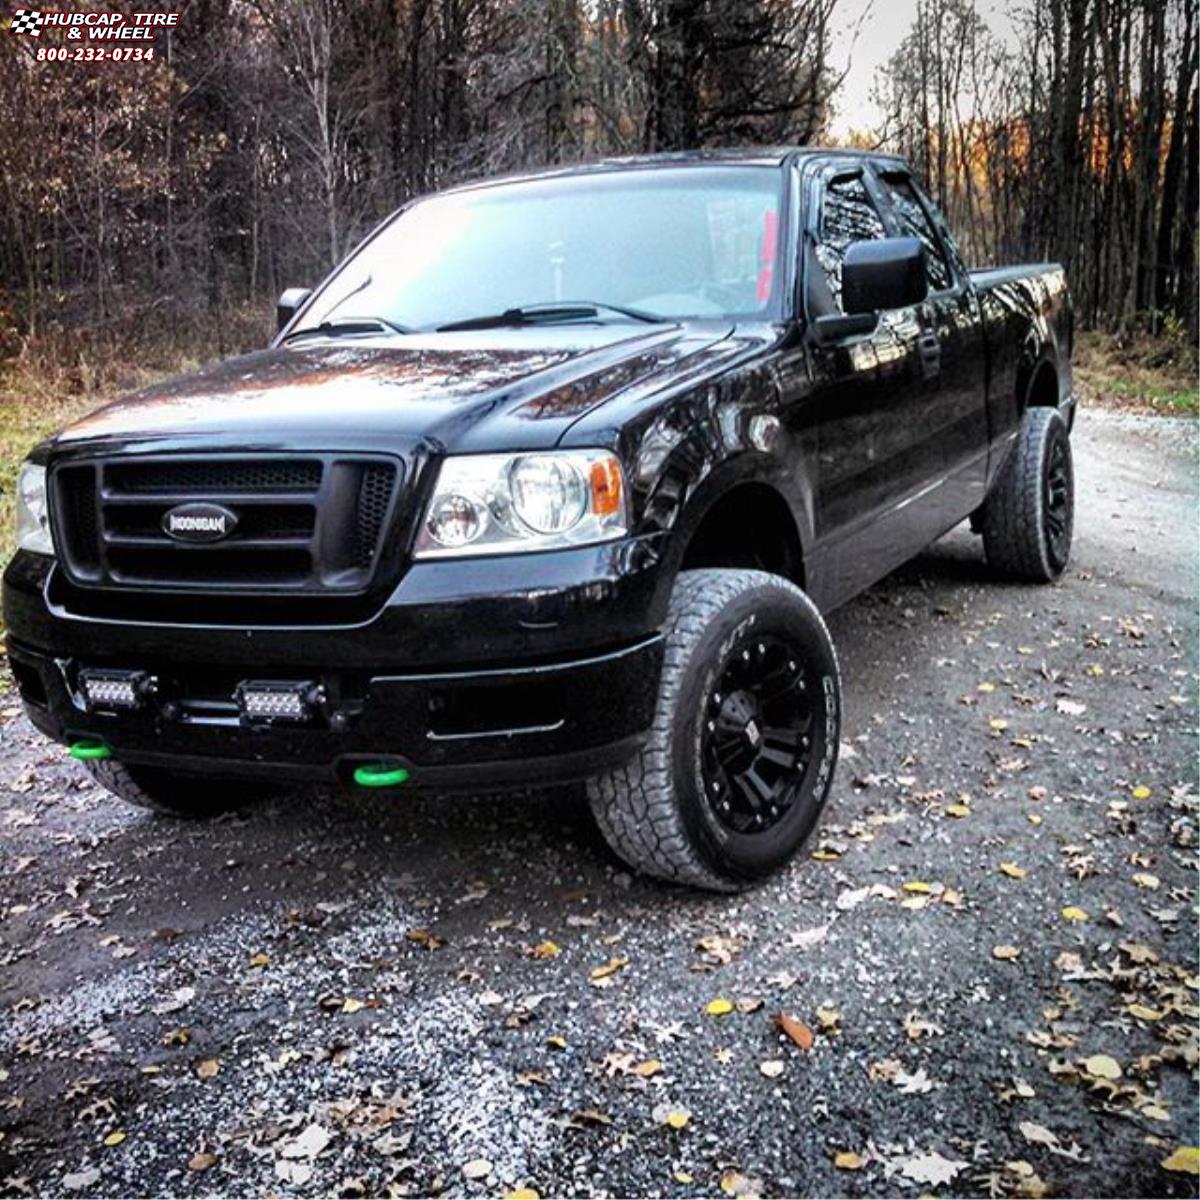 vehicle gallery/ford f 150 xd series xd778 monster x  Matte Black wheels and rims